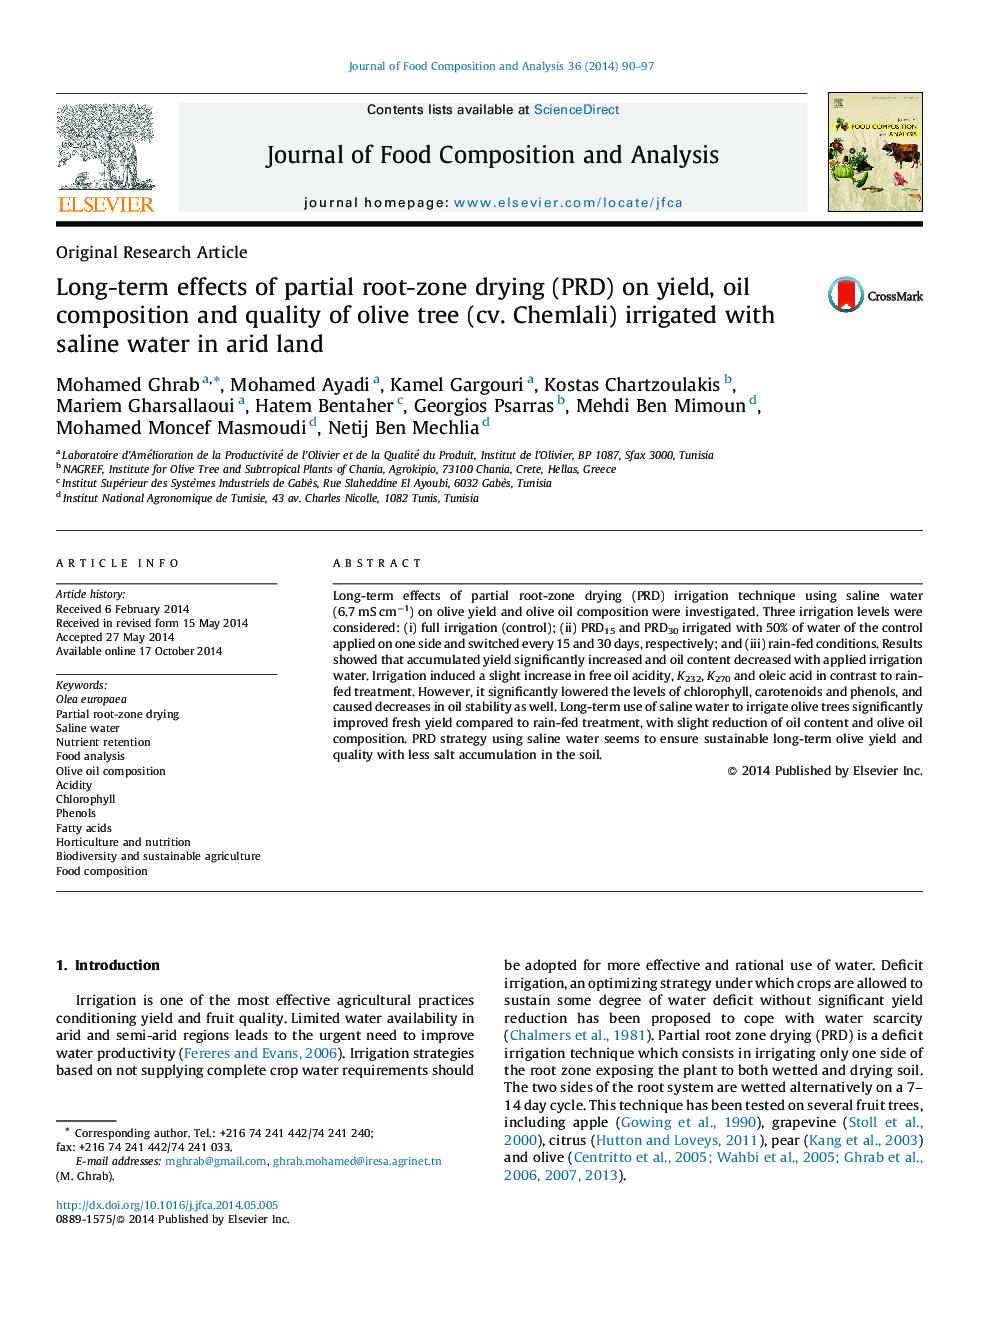 Long-term effects of partial root-zone drying (PRD) on yield, oil composition and quality of olive tree (cv. Chemlali) irrigated with saline water in arid land